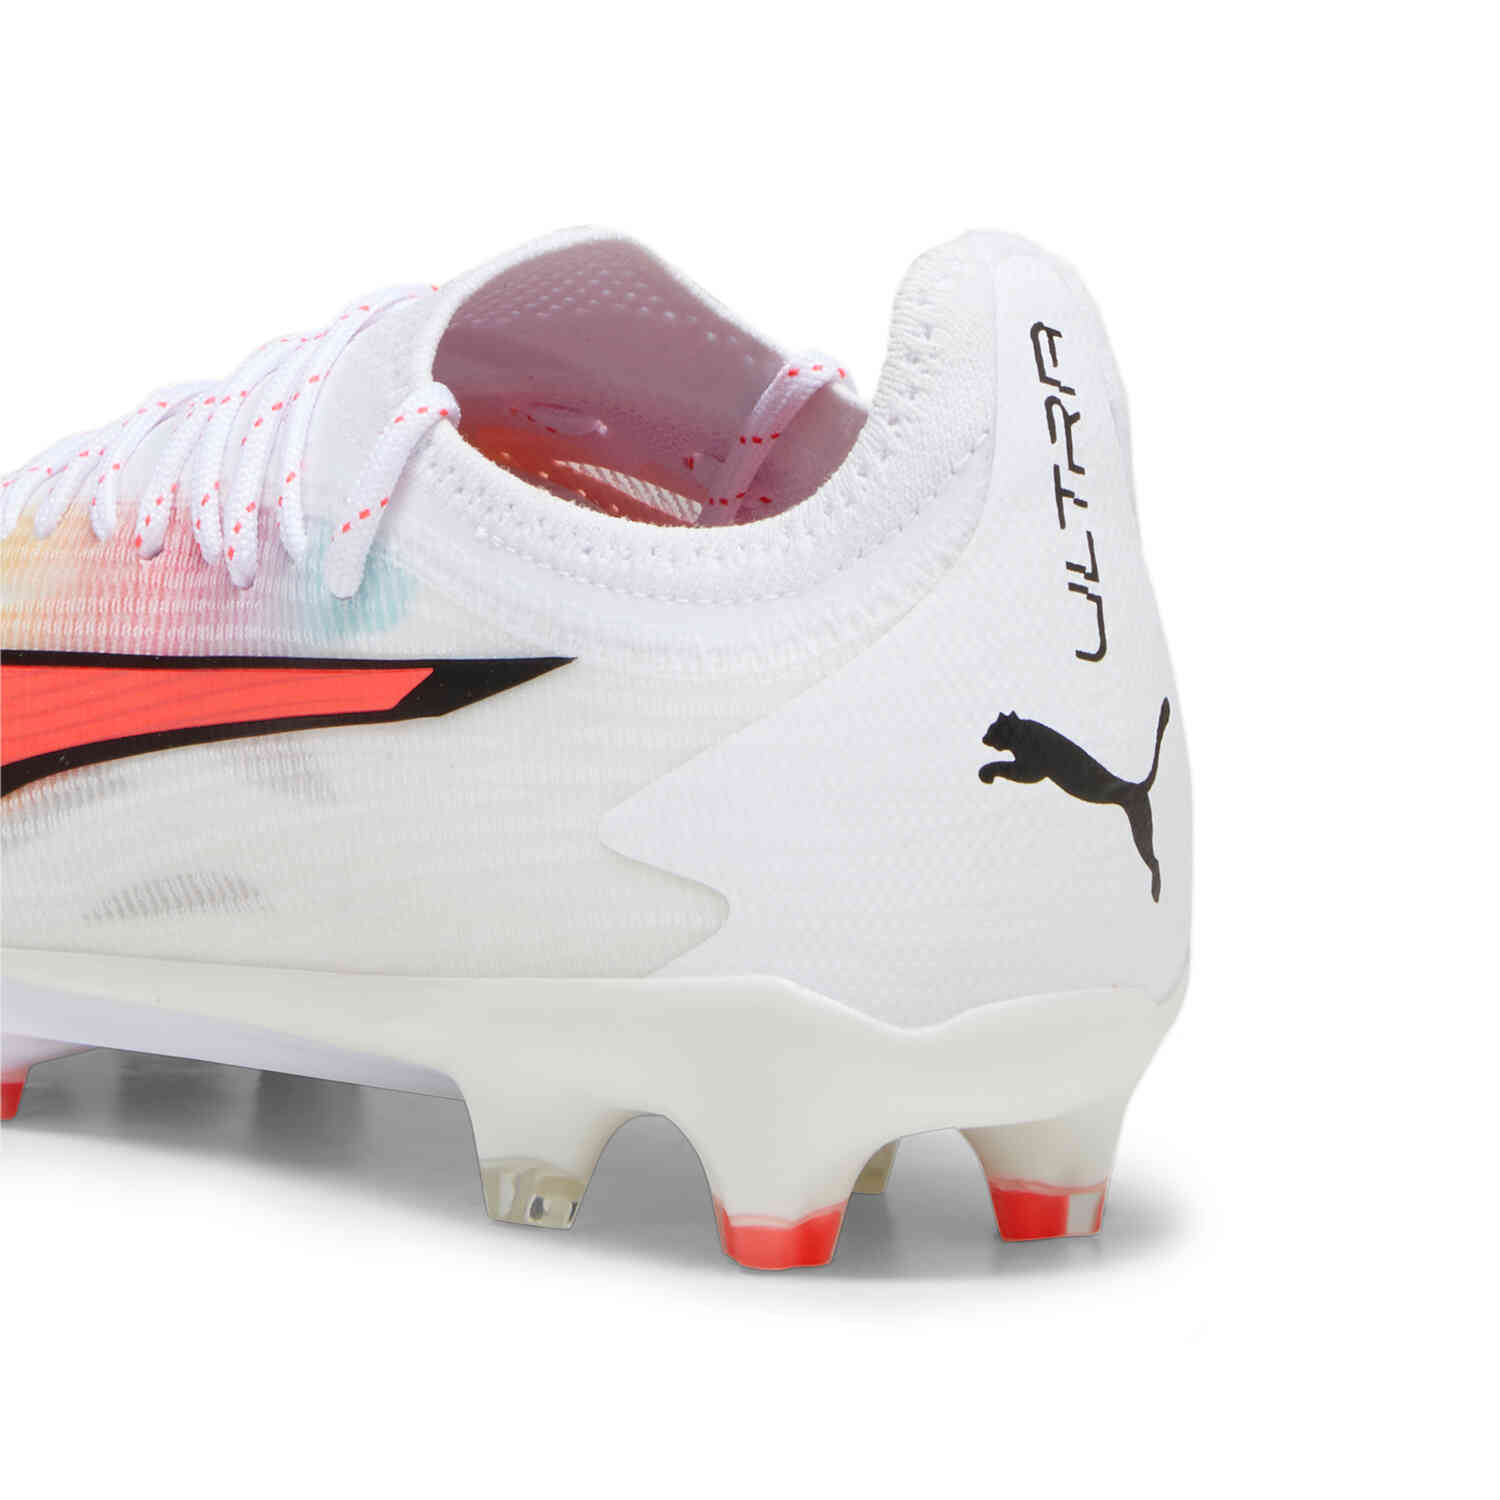 Cleats White, Master FG/AG & Soccer - ULTIMATE ULTRA - PUMA Soccer Black Fire Orchid